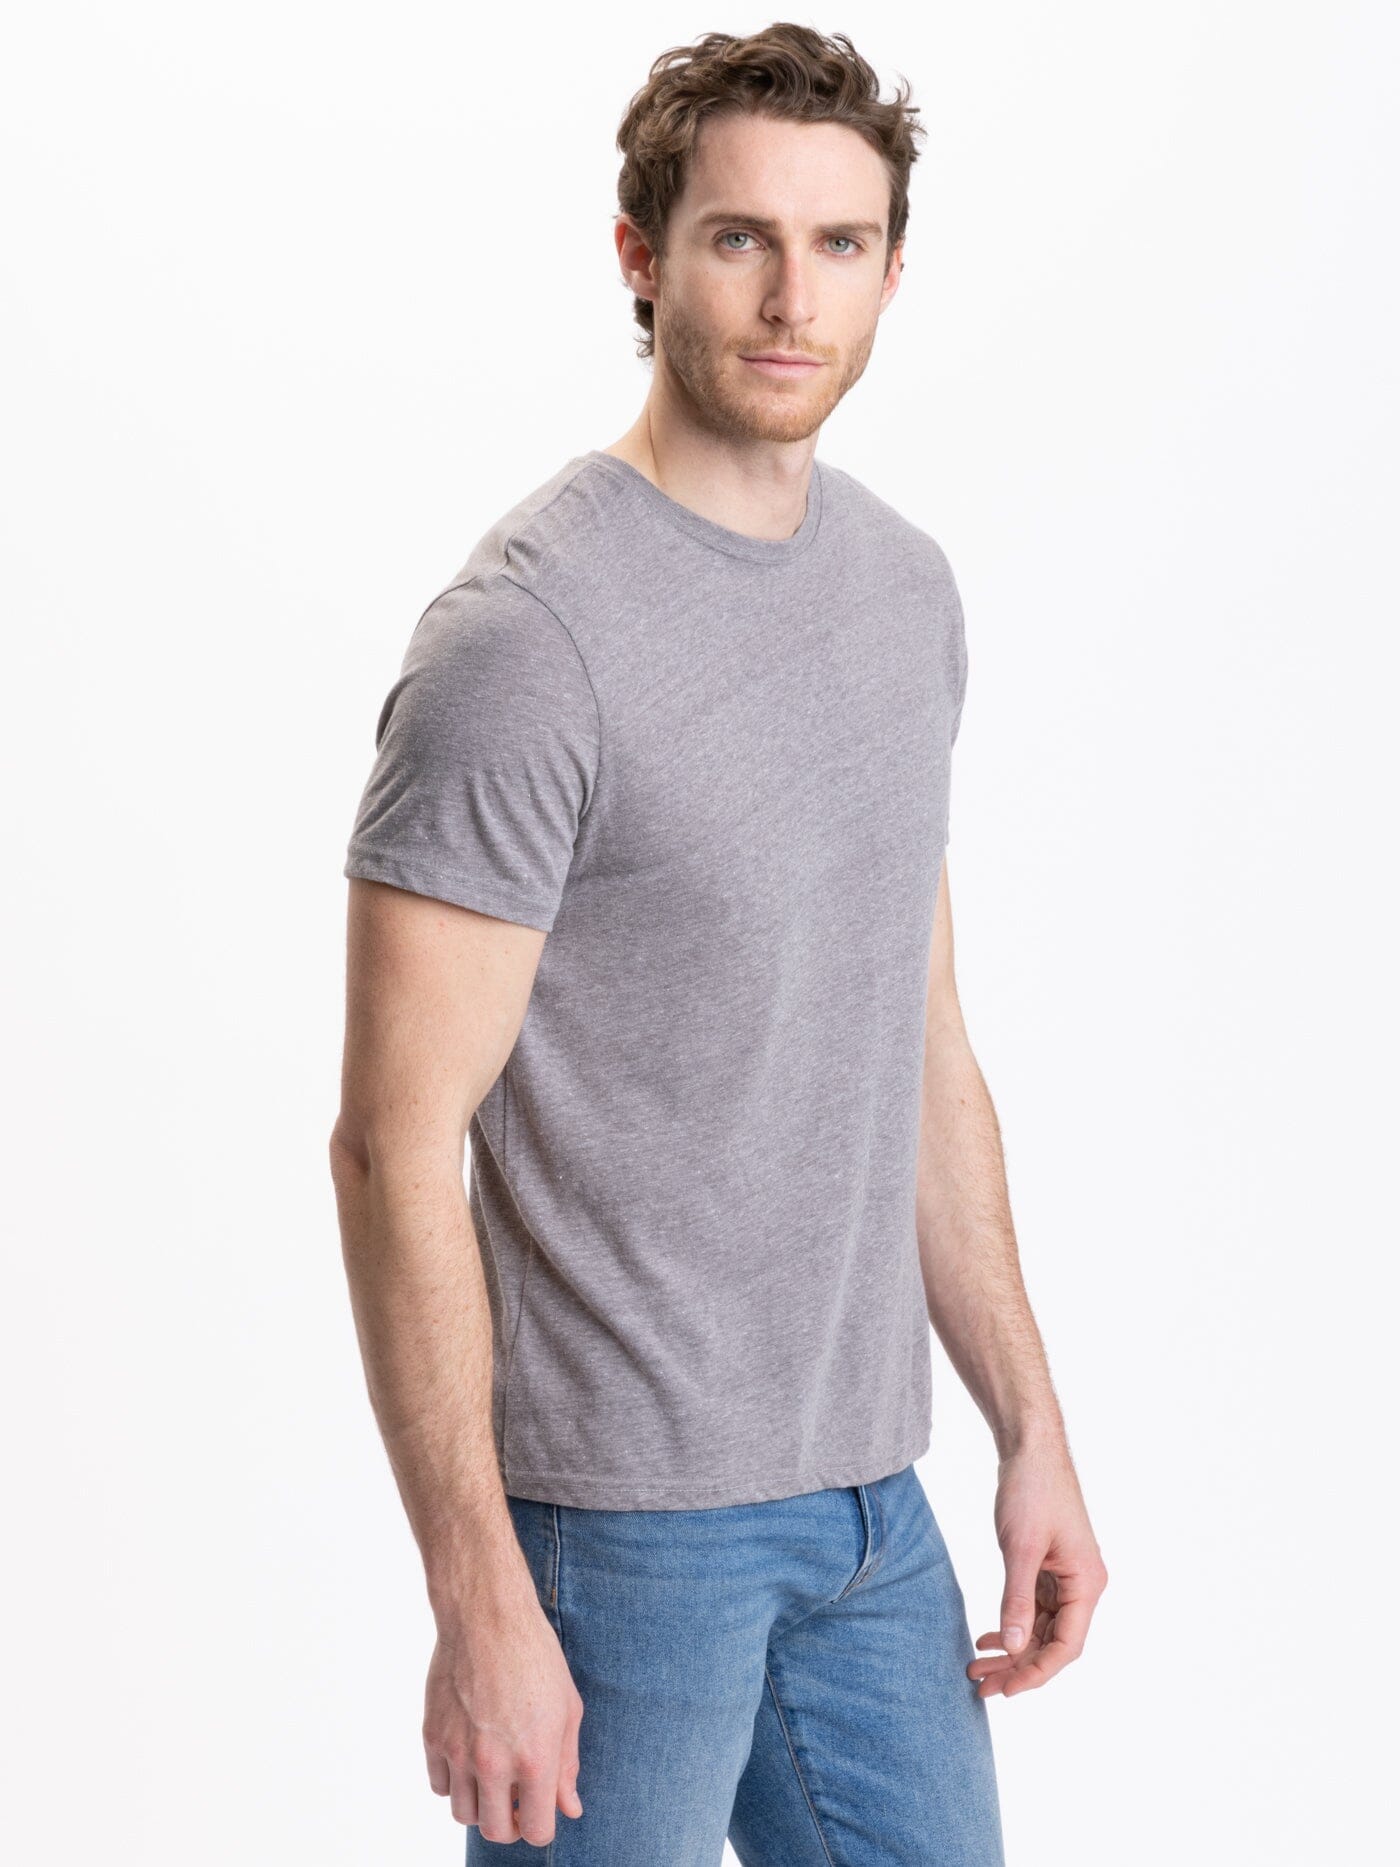 Triblend Crew Neck Thought Tee – in Threads Grey Heather 4